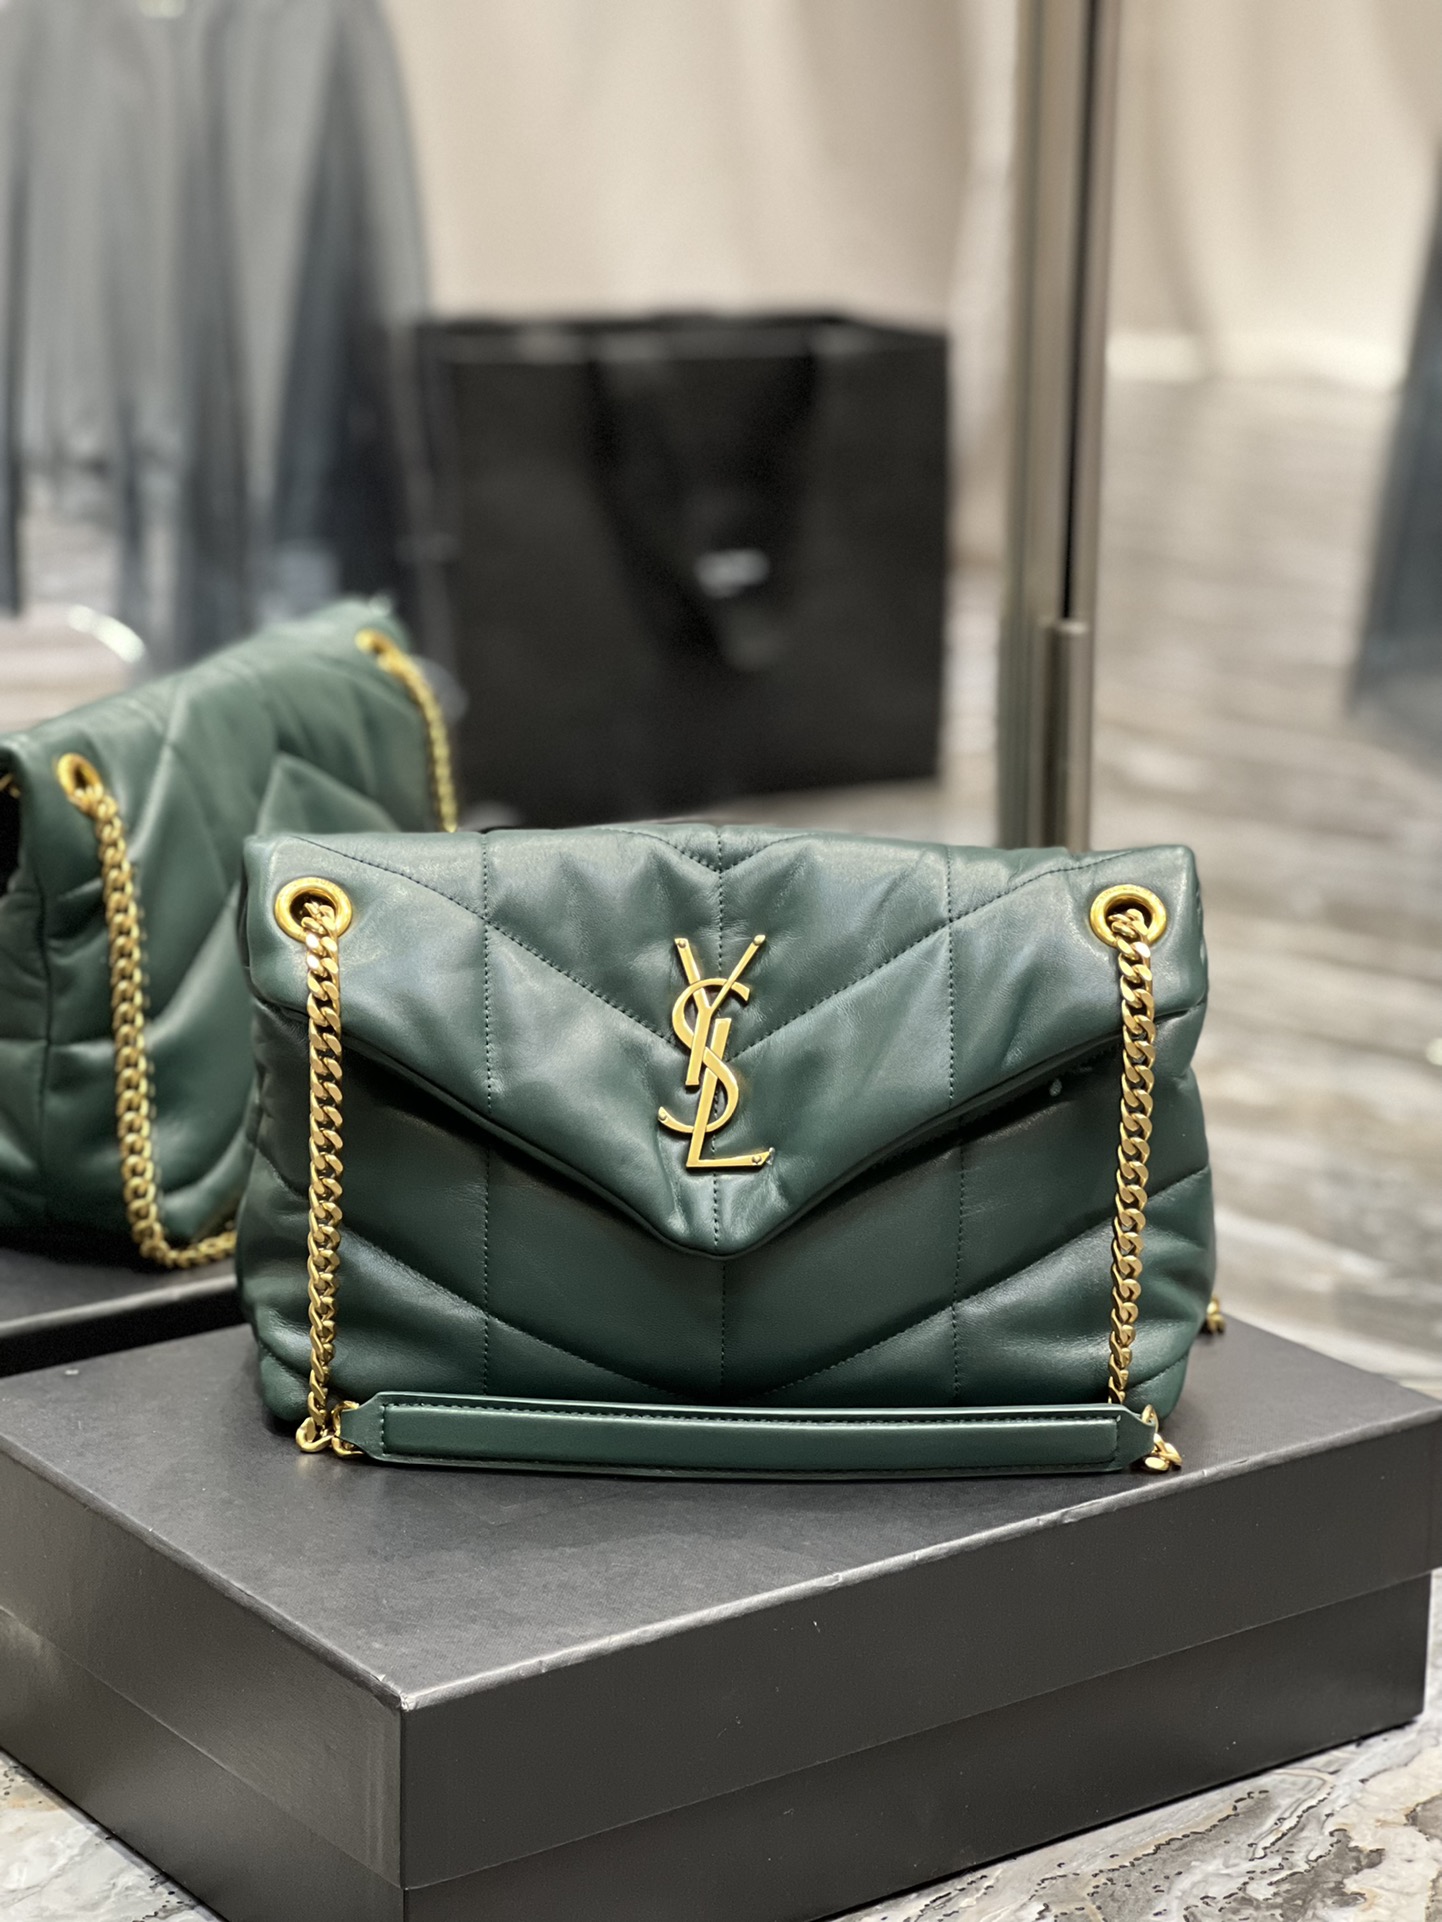 Saint Laurent Loulou Puffer Small Bag in quilted lambskin leather emerald green